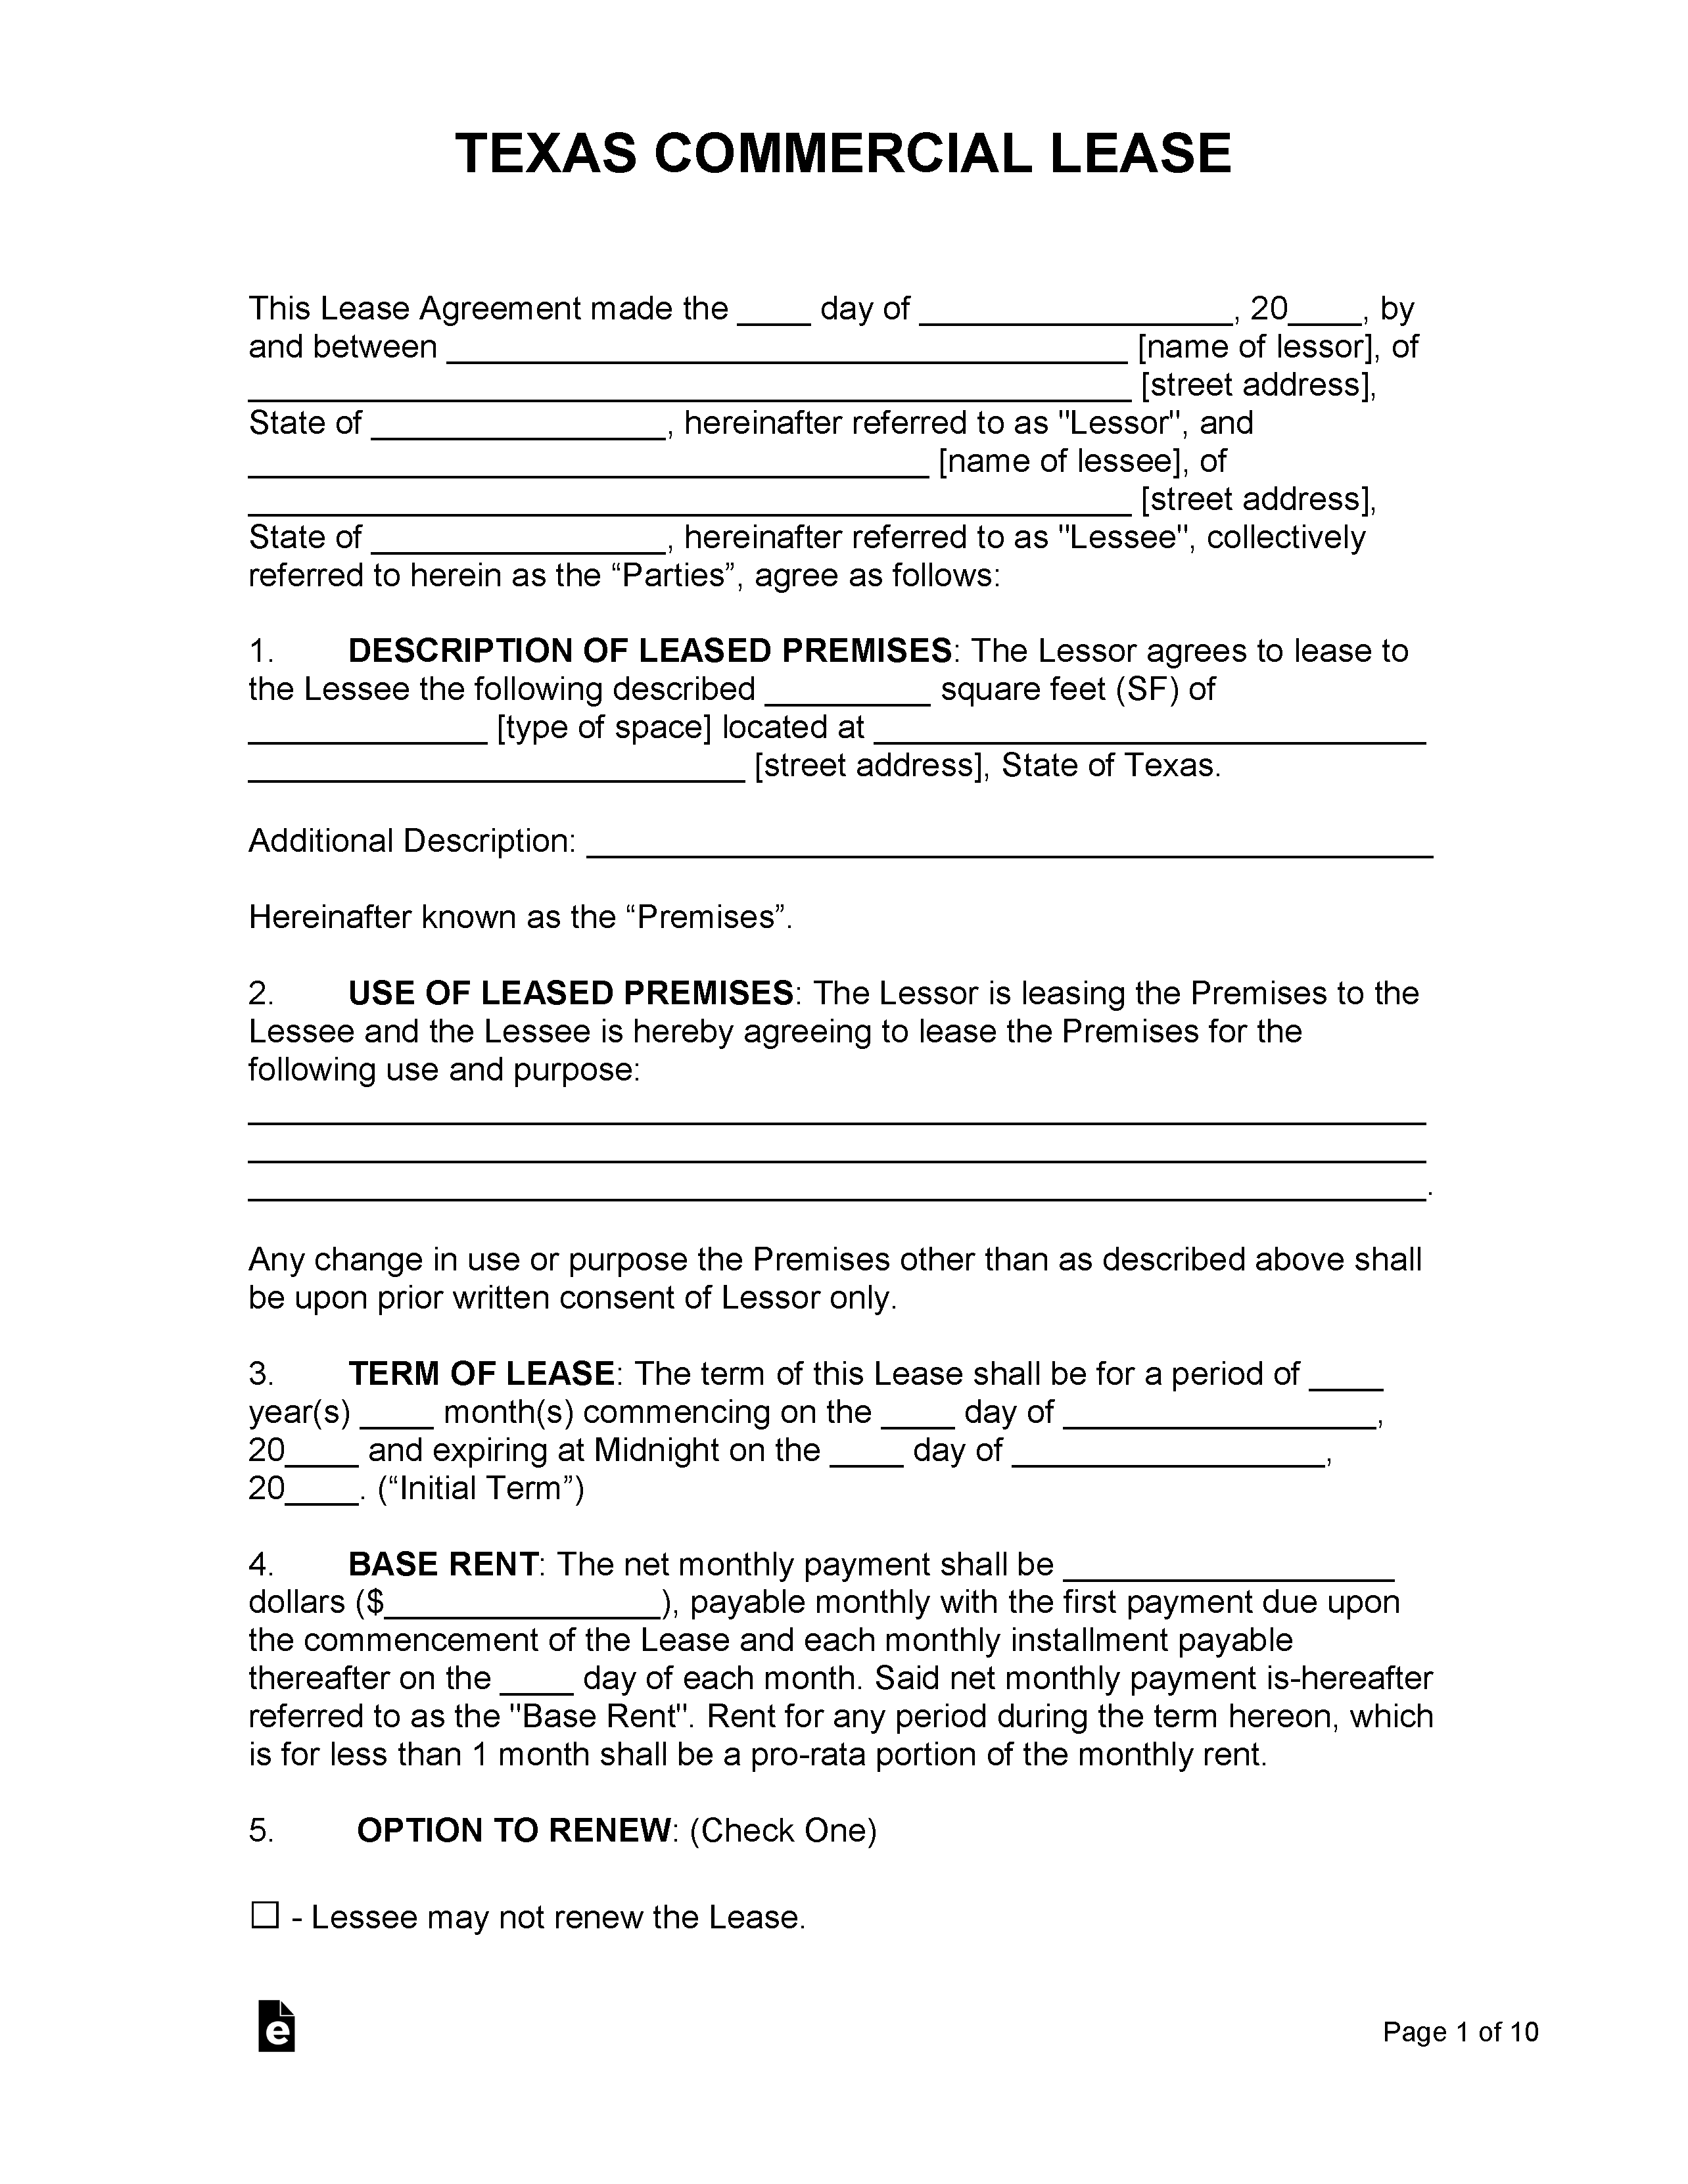 free-texas-commercial-lease-agreement-template-pdf-word-rtf